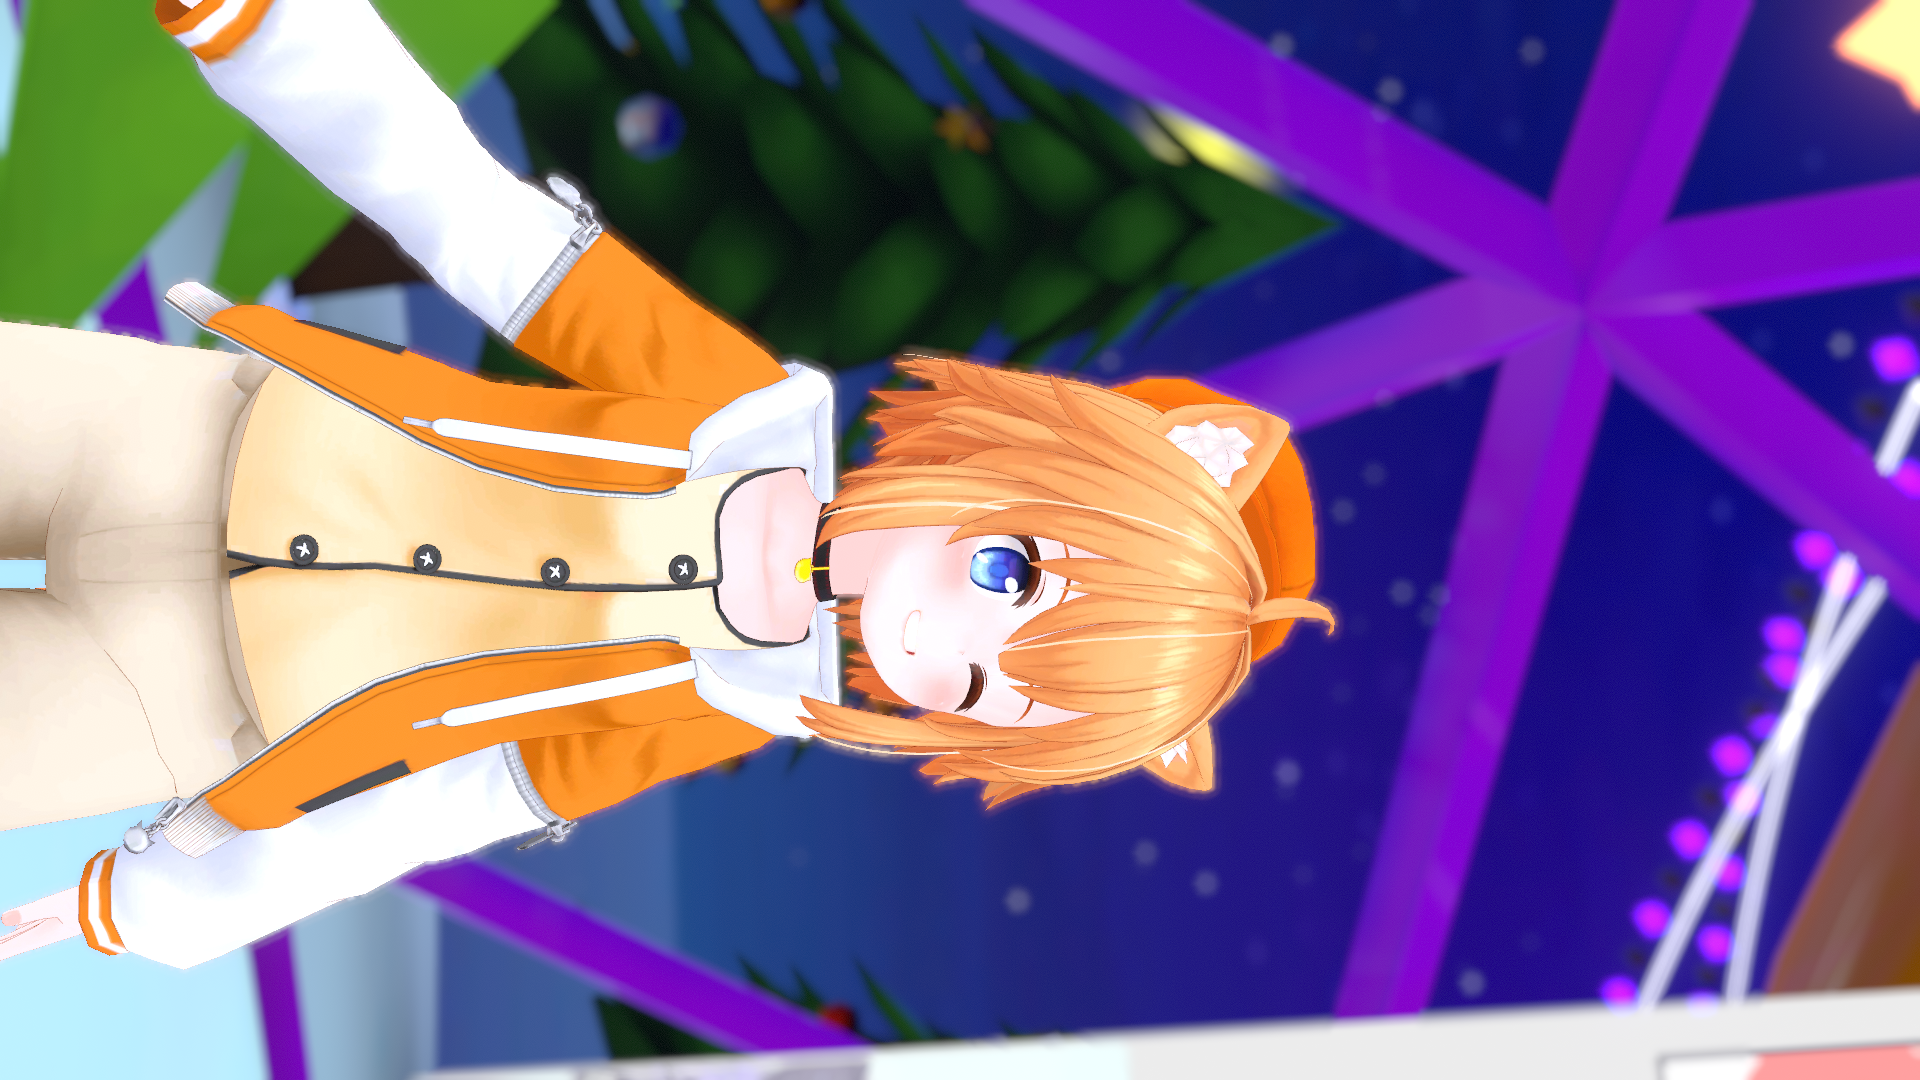 VRChat_1920x1080_2021-12-05_05-06-05.553.png